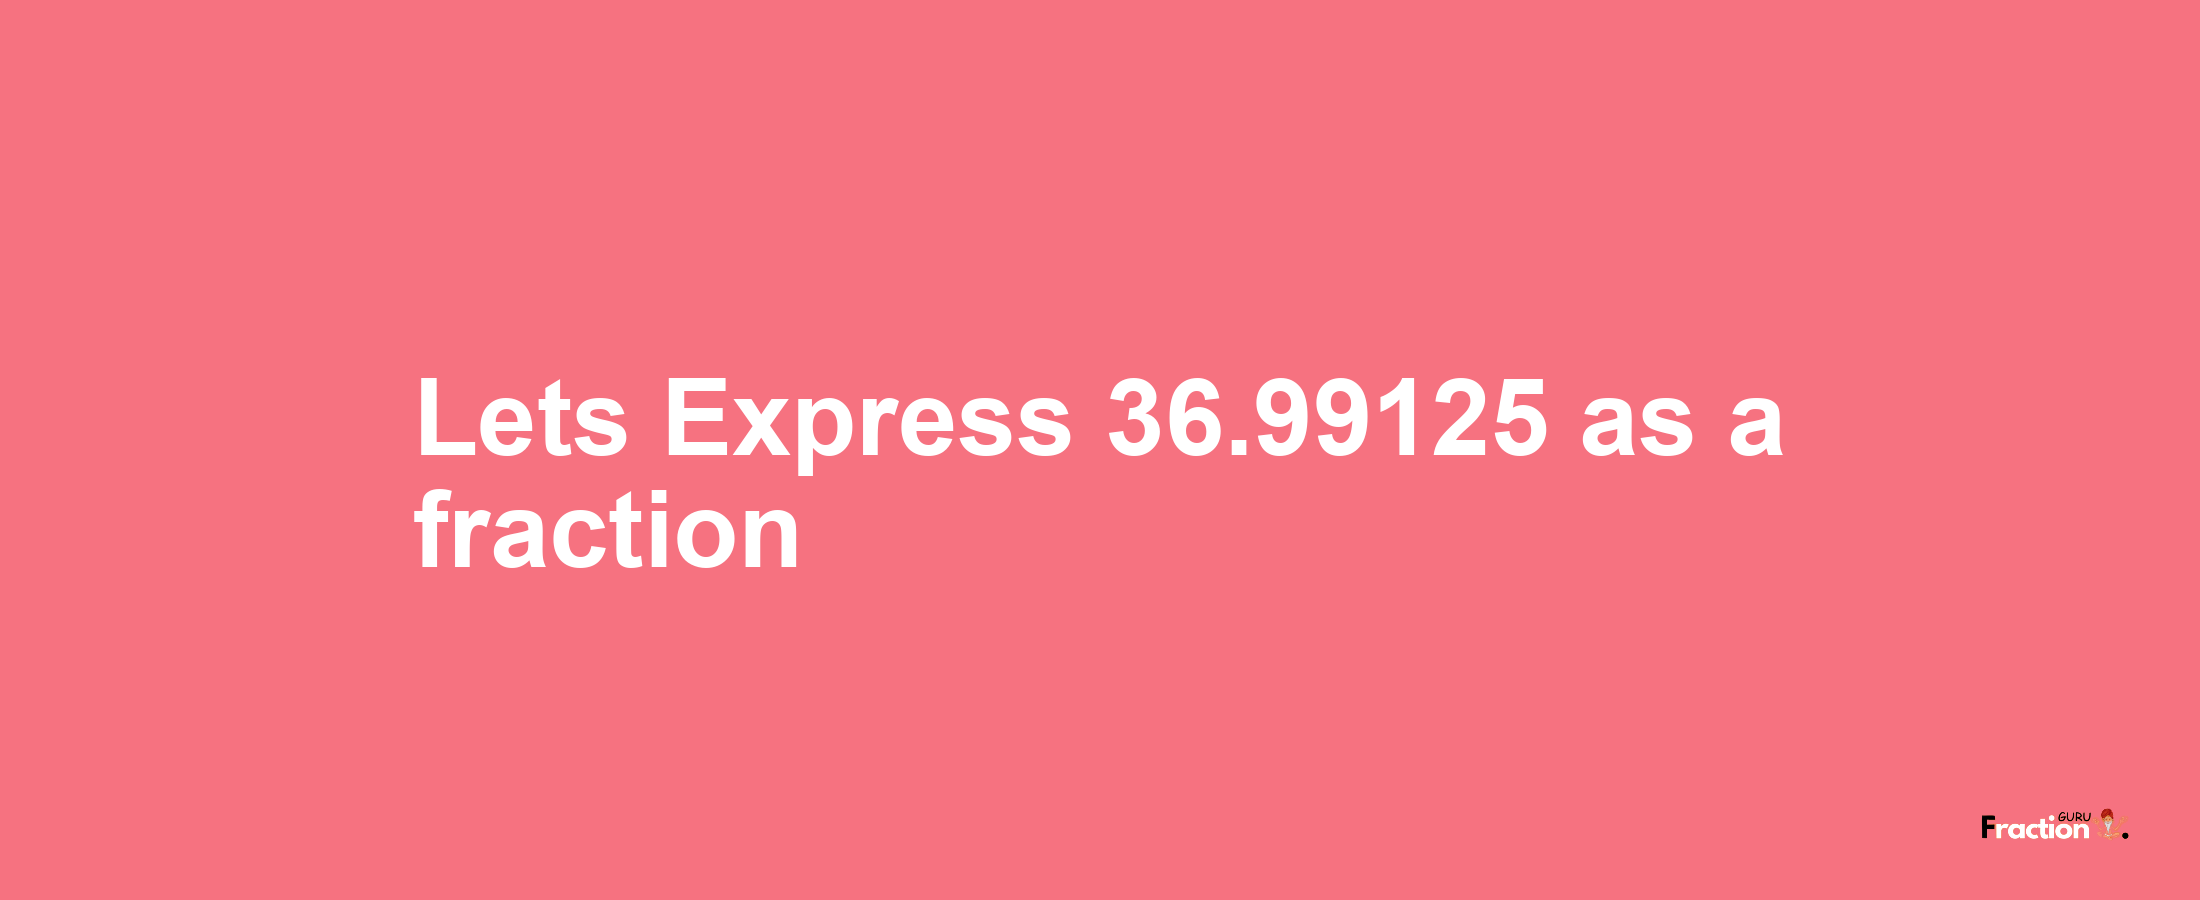 Lets Express 36.99125 as afraction